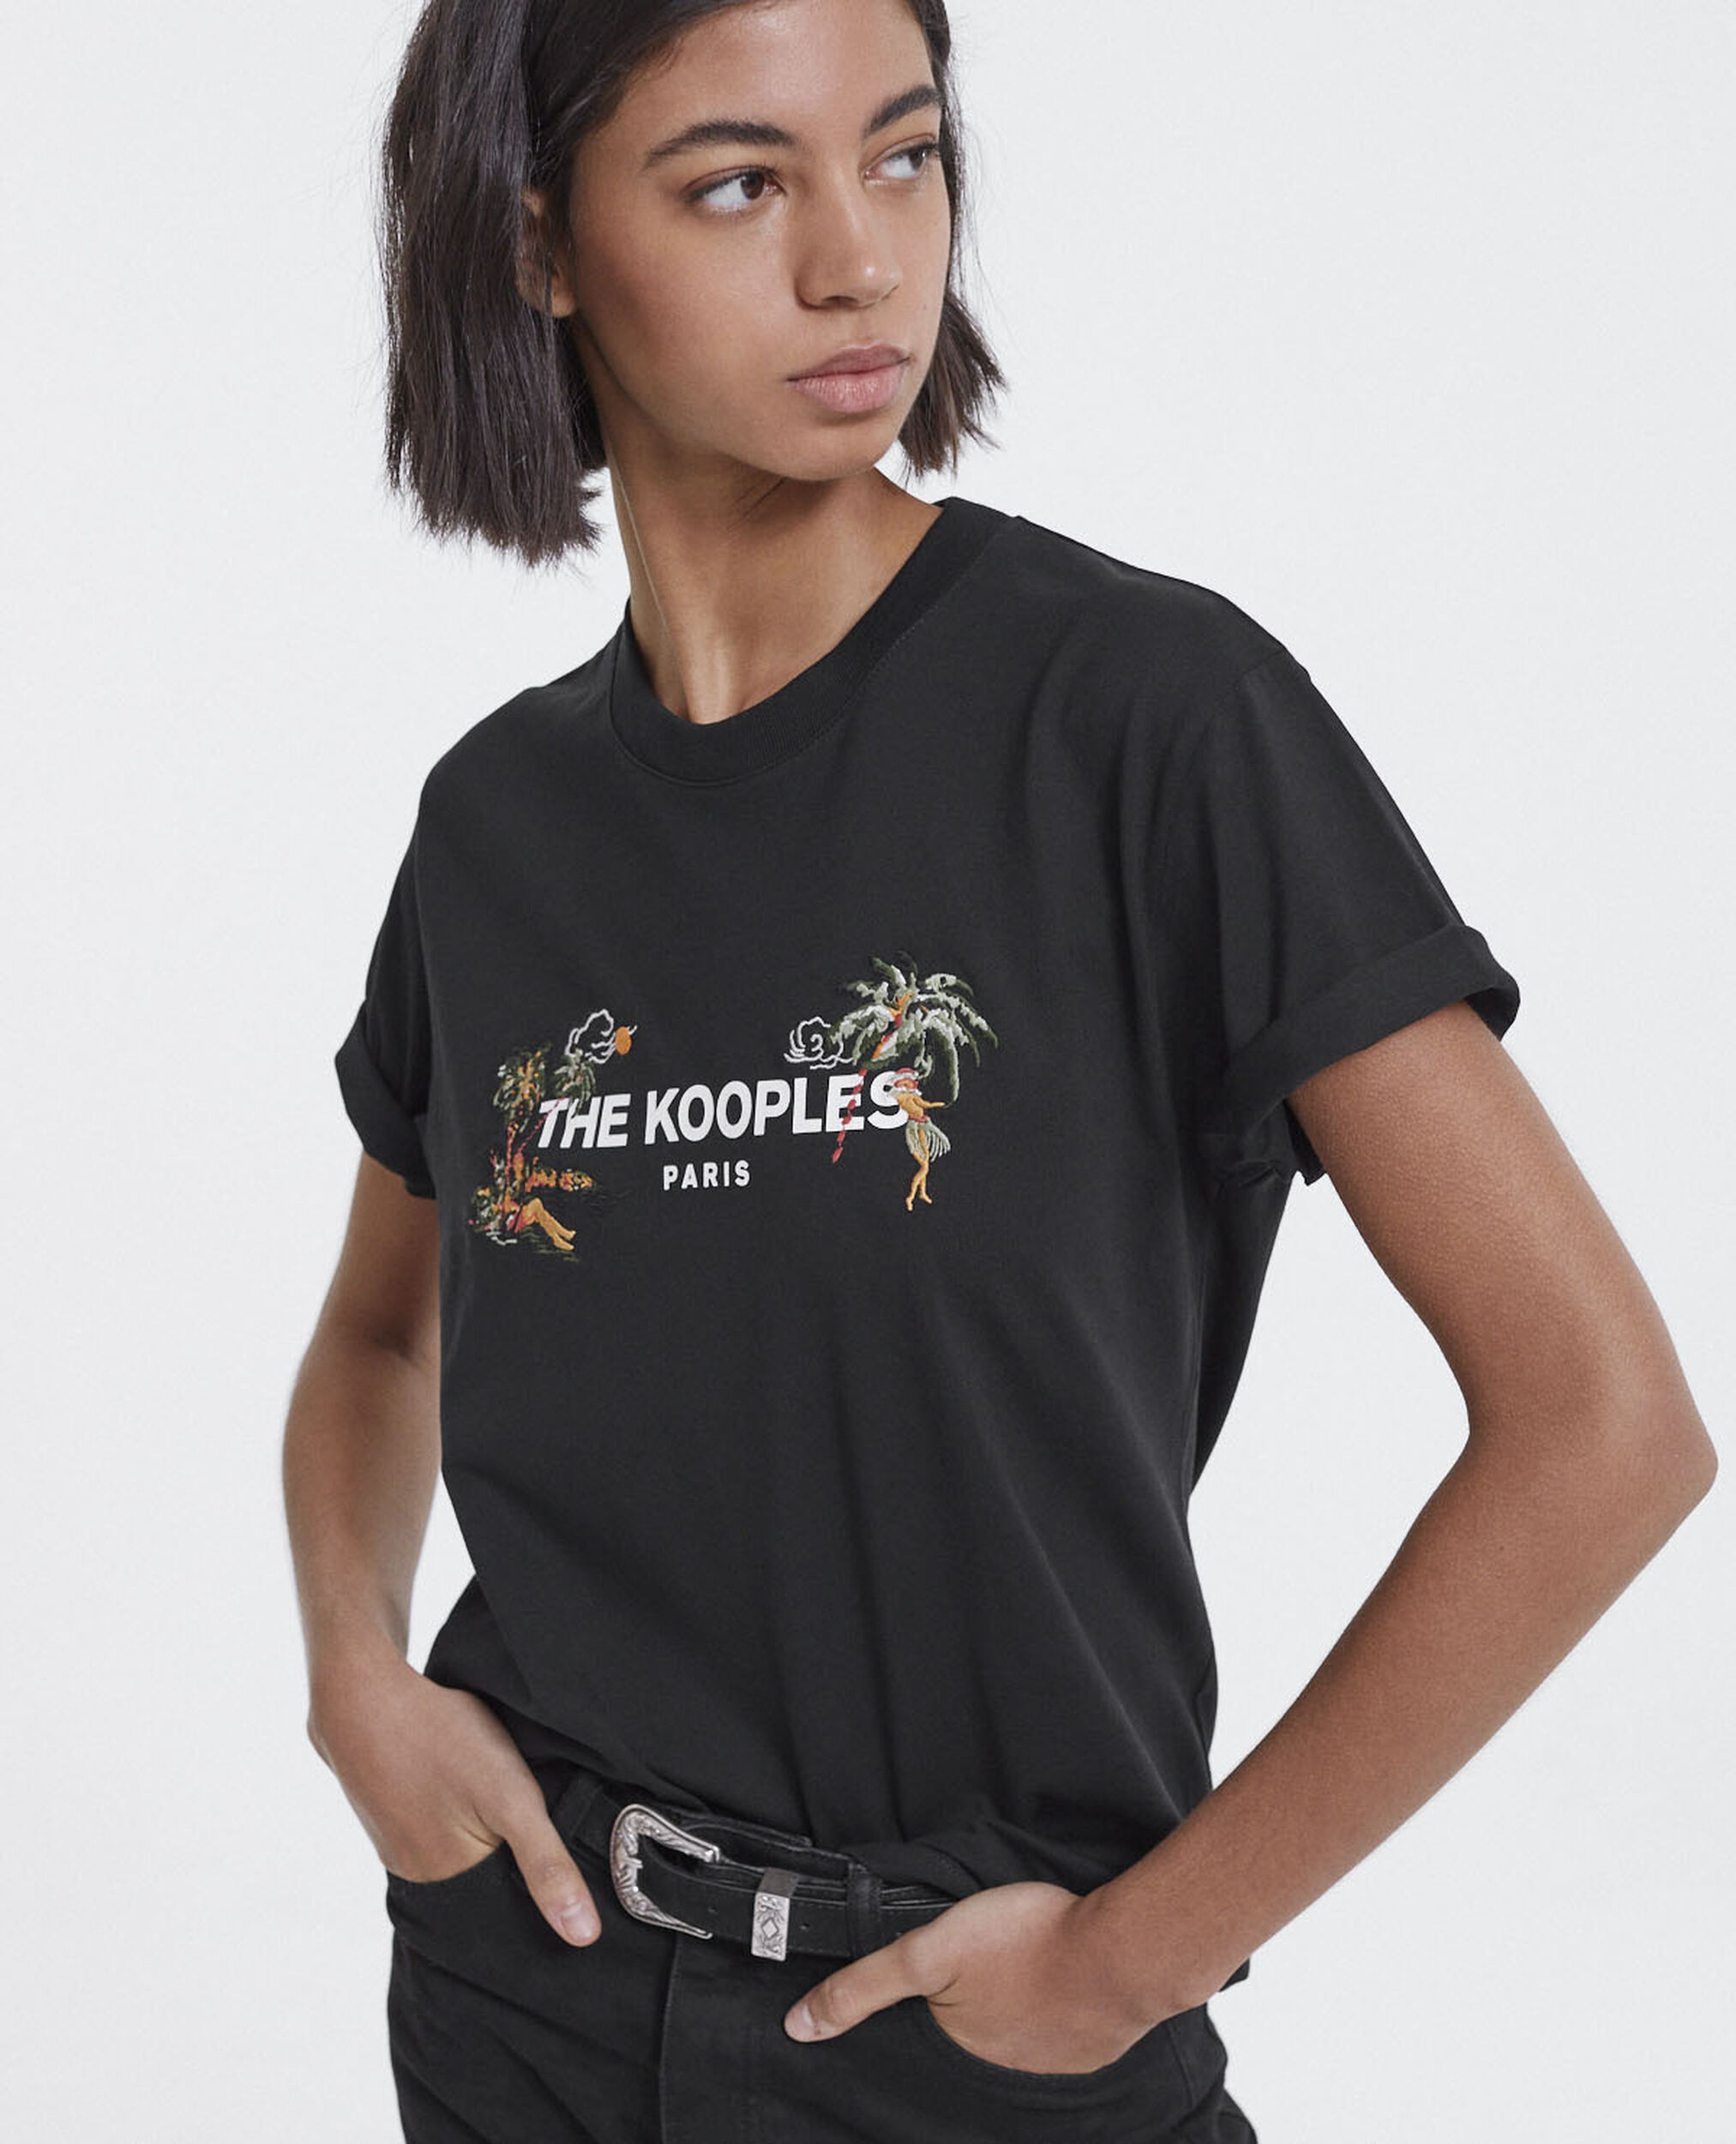 Embroidered black T-shirt with The Kooples logo, BLACK, hi-res image number null